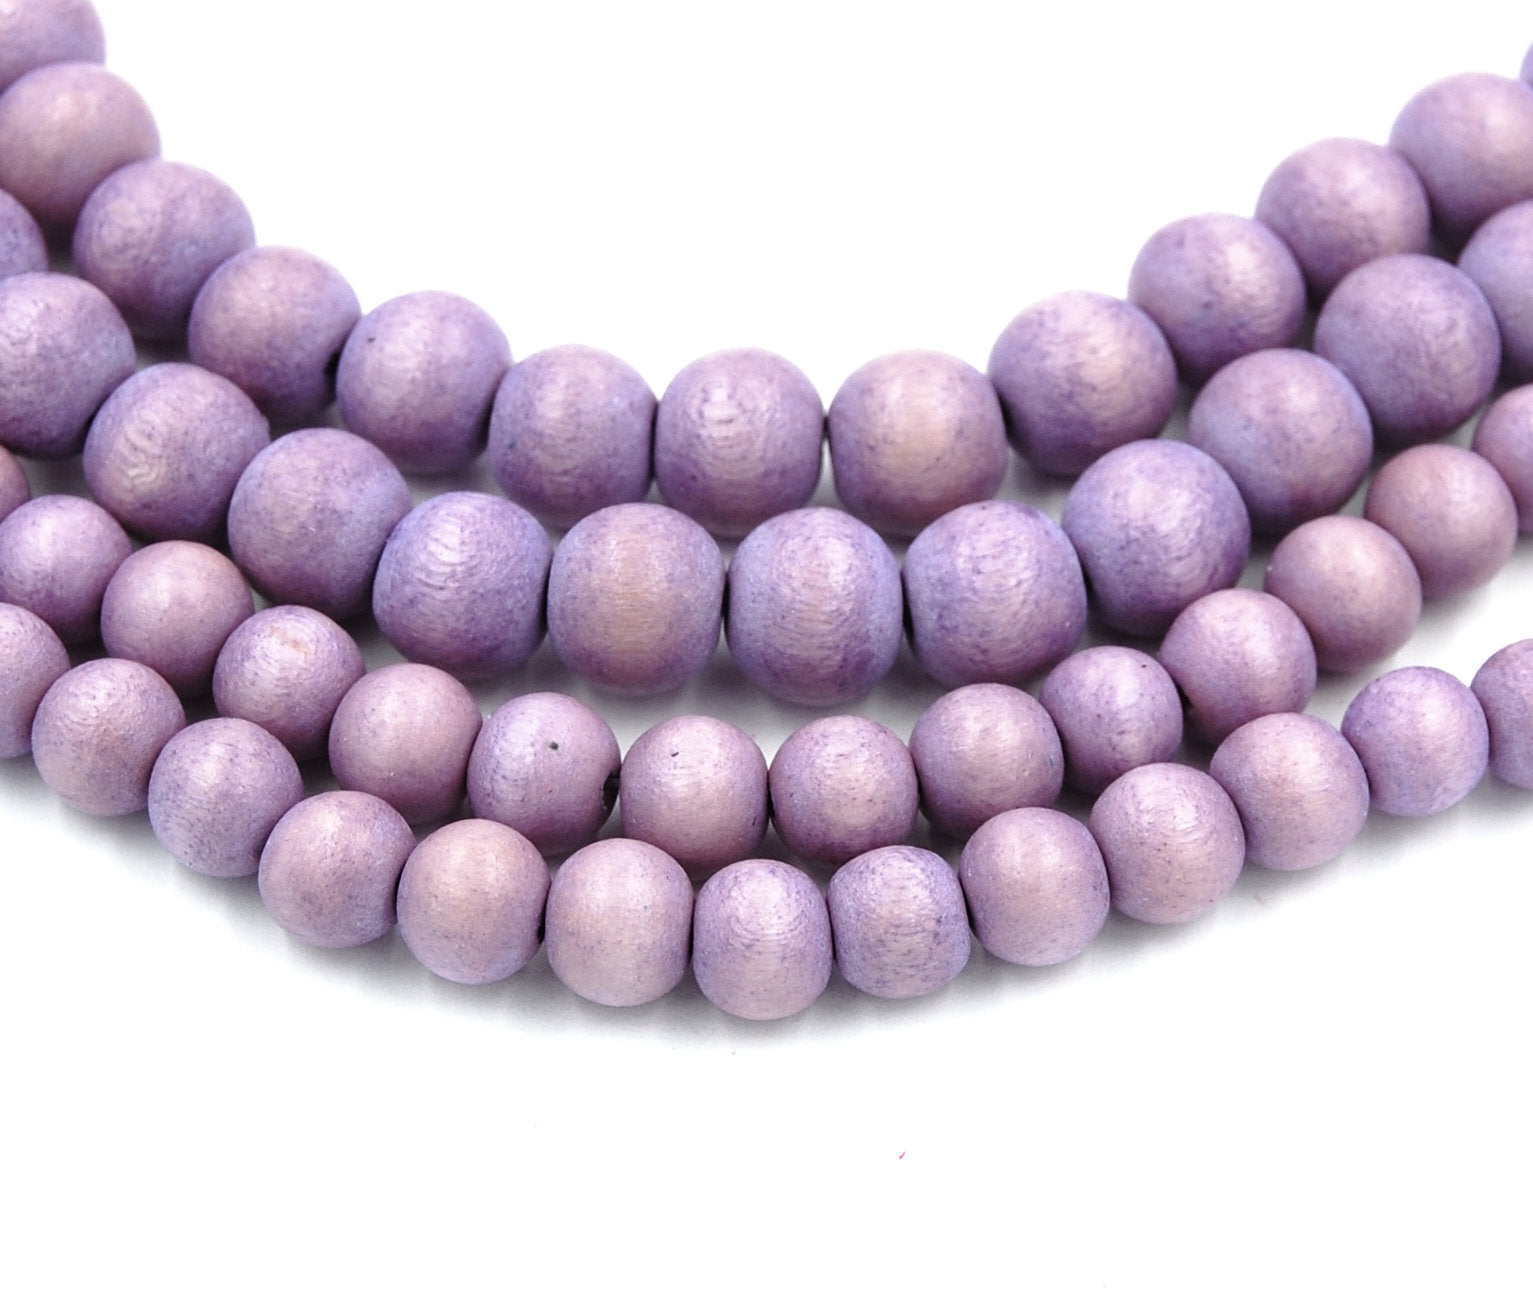 French Violet Purple Beads 6mm 8mm 10mm Wood beads -16 inch strand